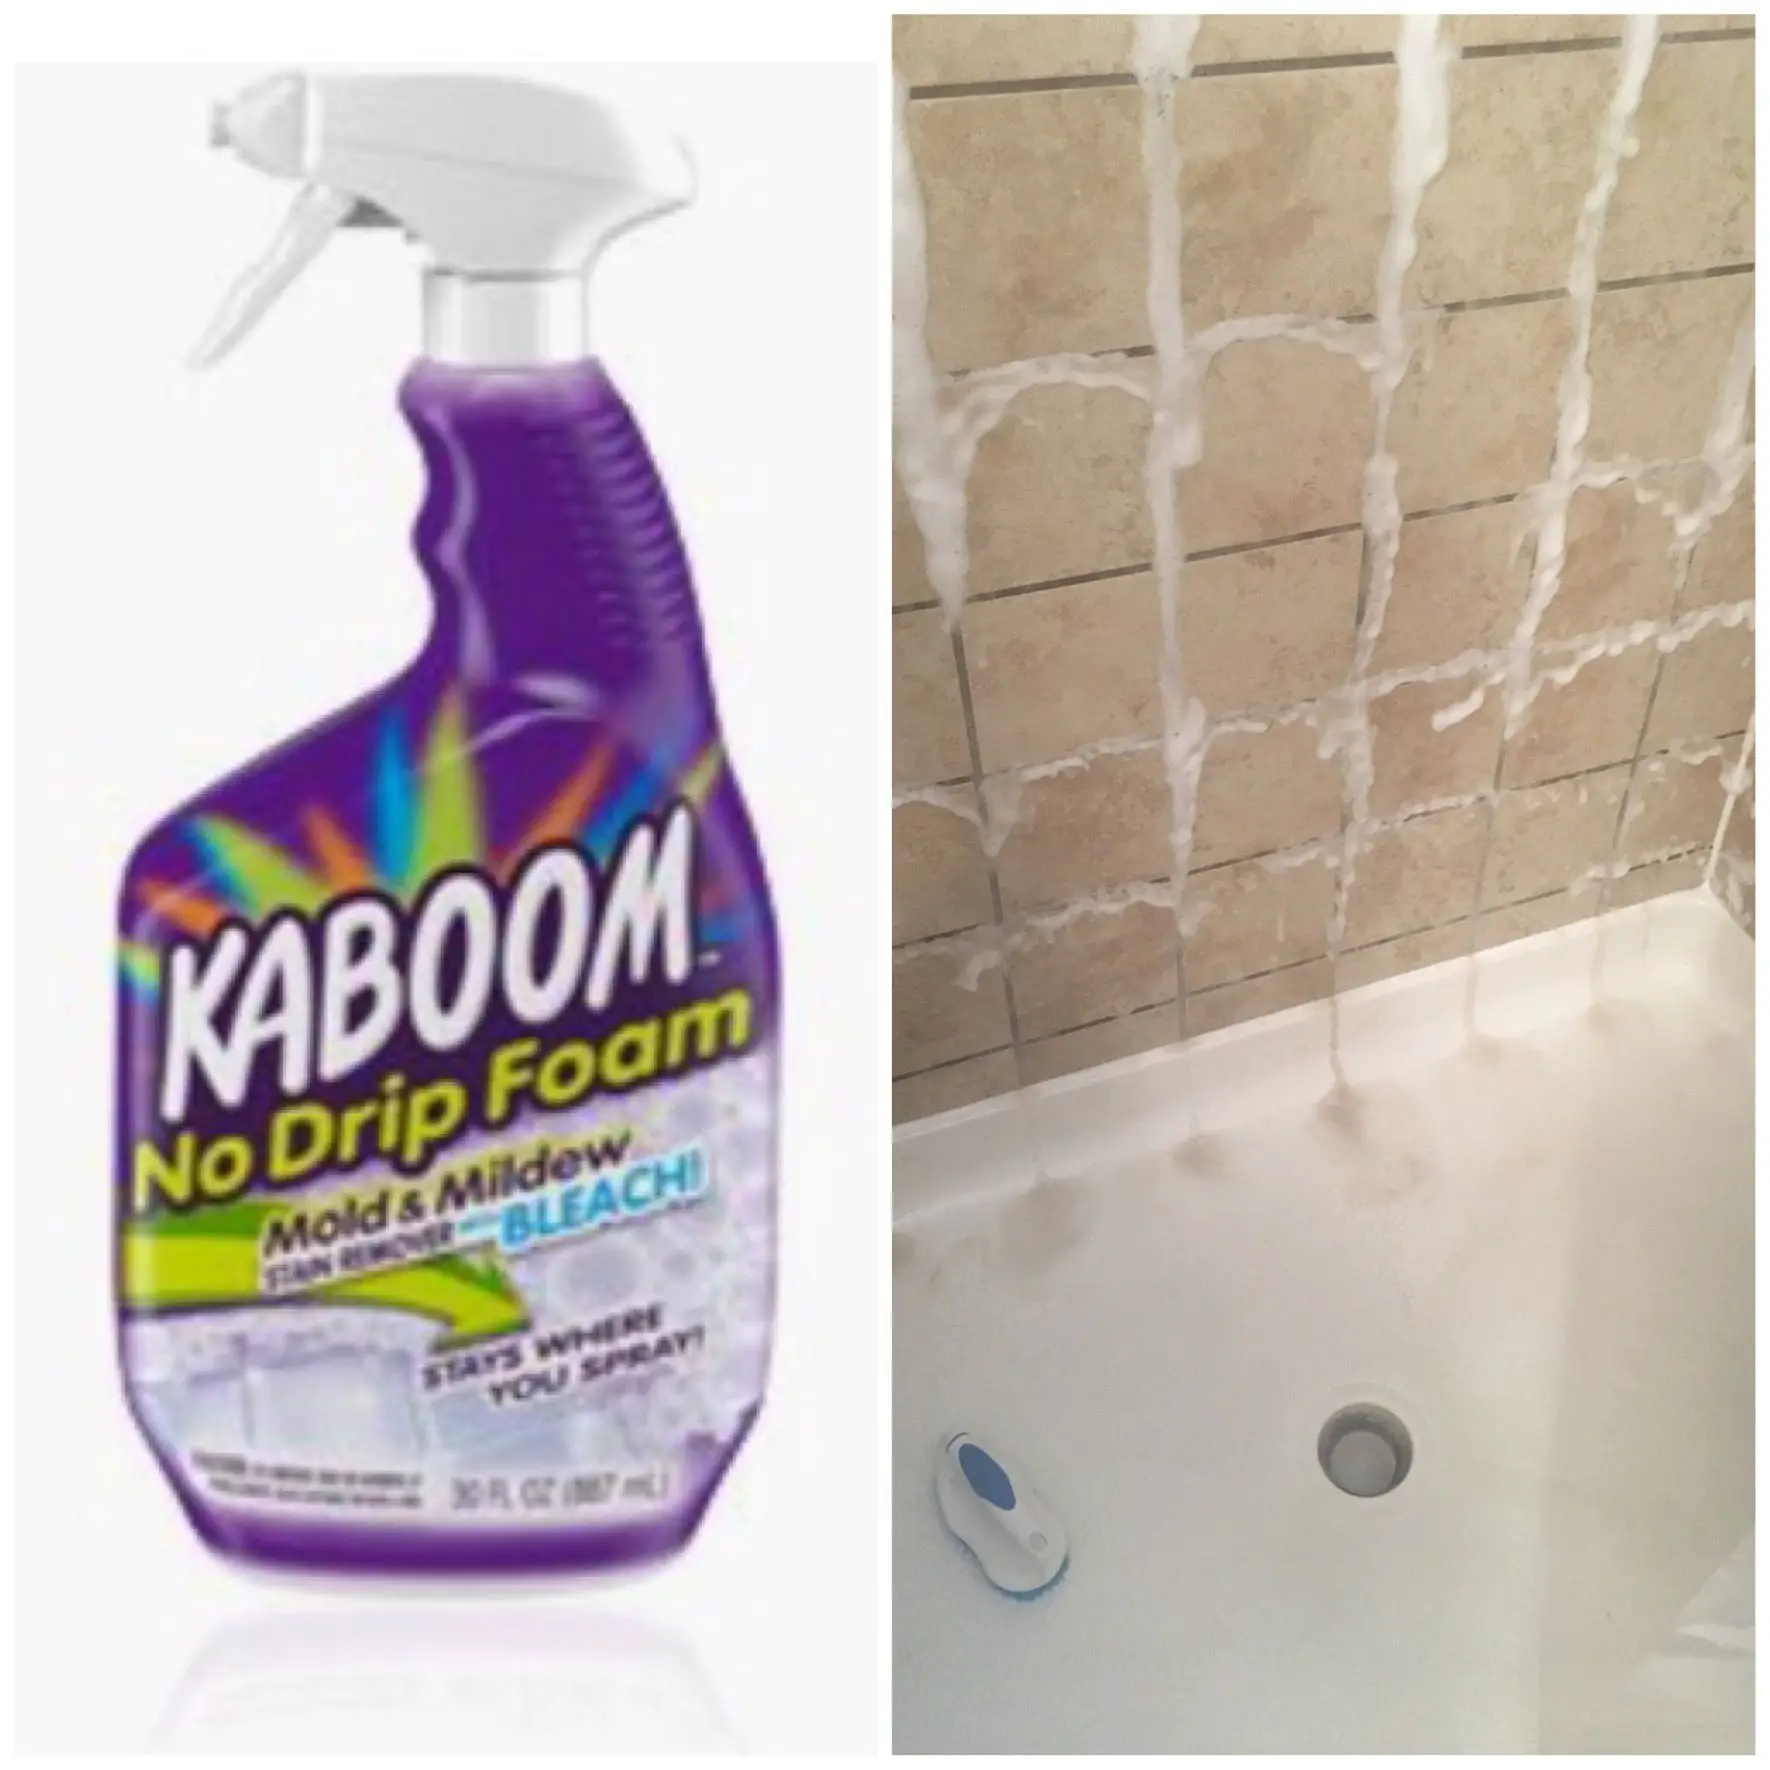 Love the Kaboom No Drip Foam Mold &  Mildew Stain Remover with Bleach I ...